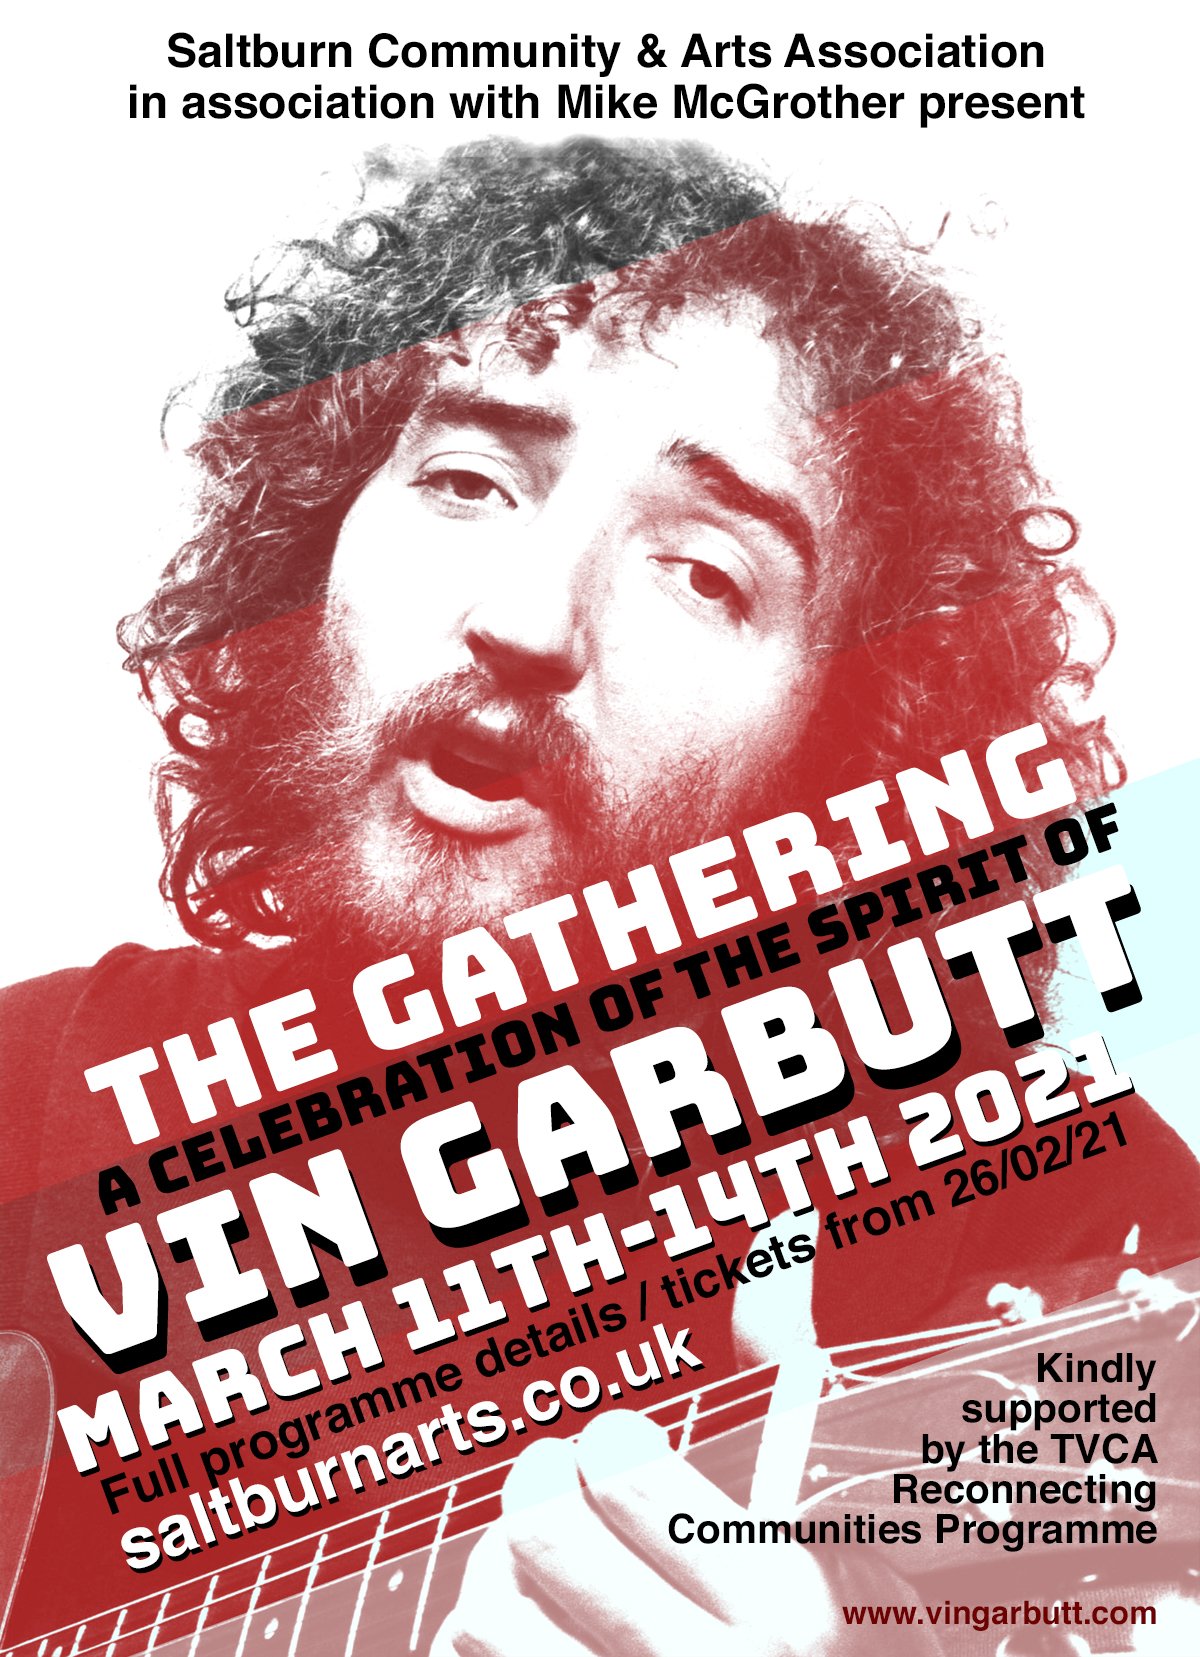 Vin Garbutt Celebration March 11th to 14th 2021